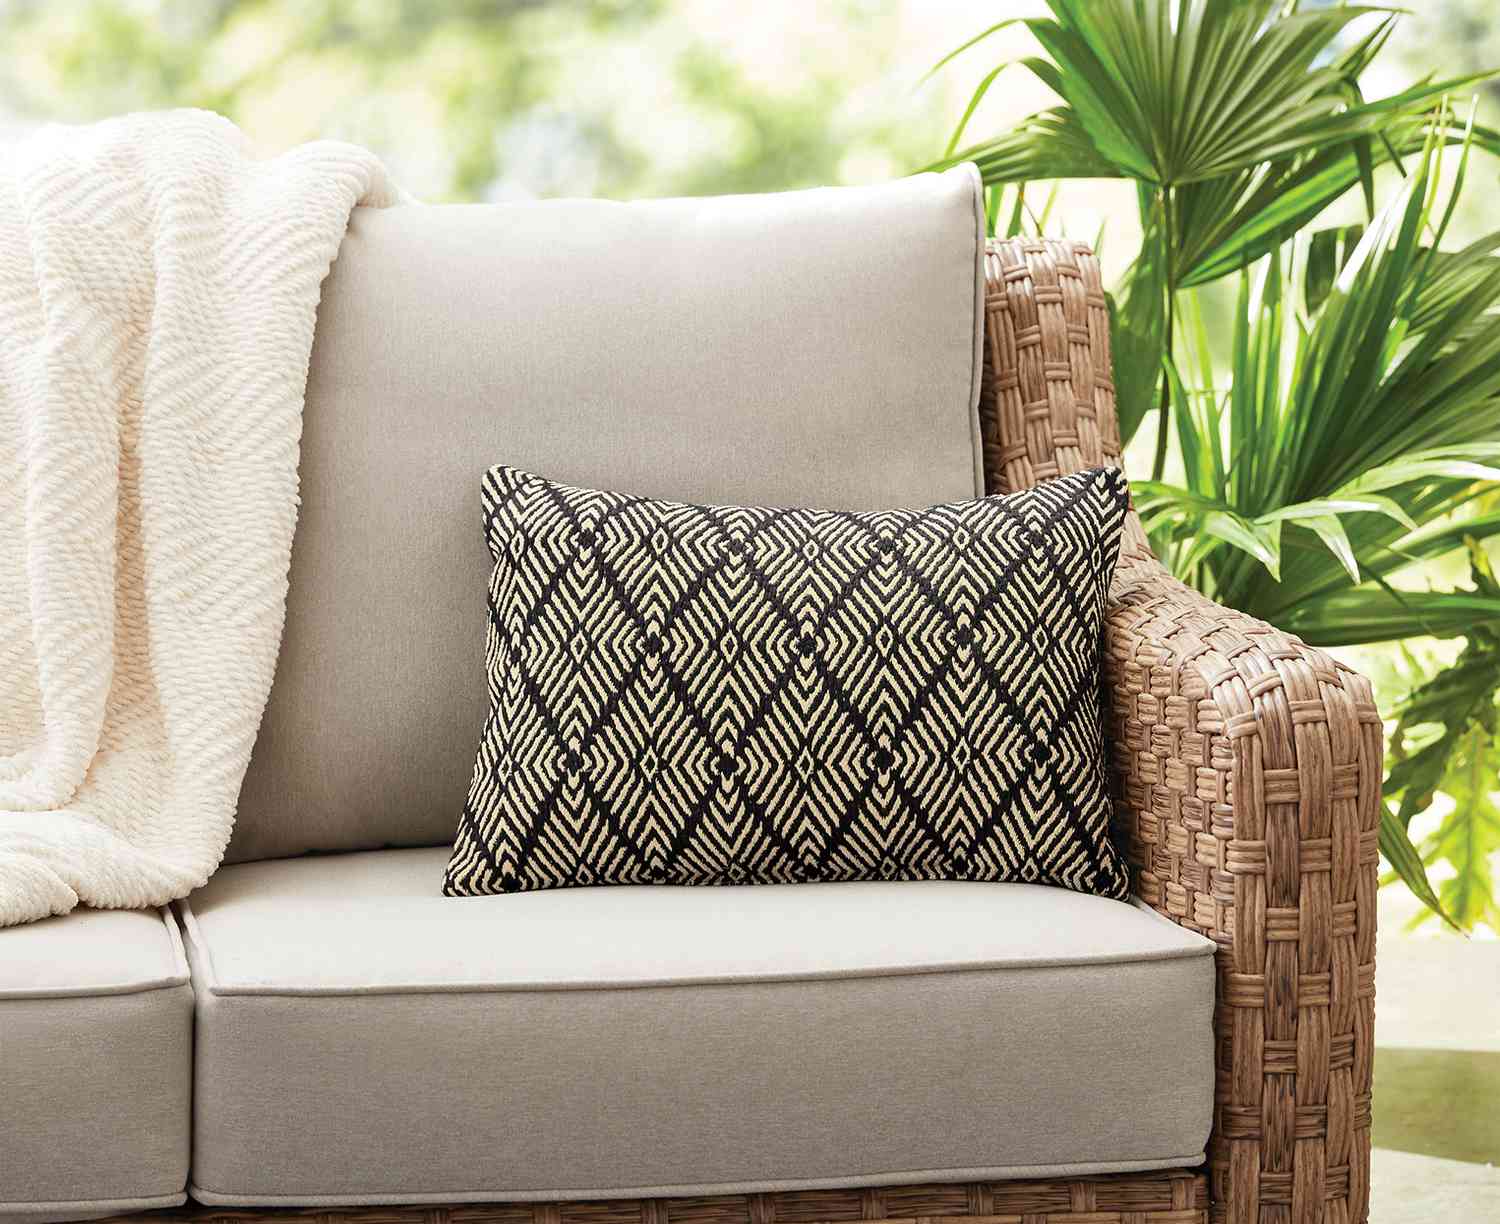 10 Best Outdoor Pillows To Spruce Up, Coordinating Outdoor Rugs And Pillows